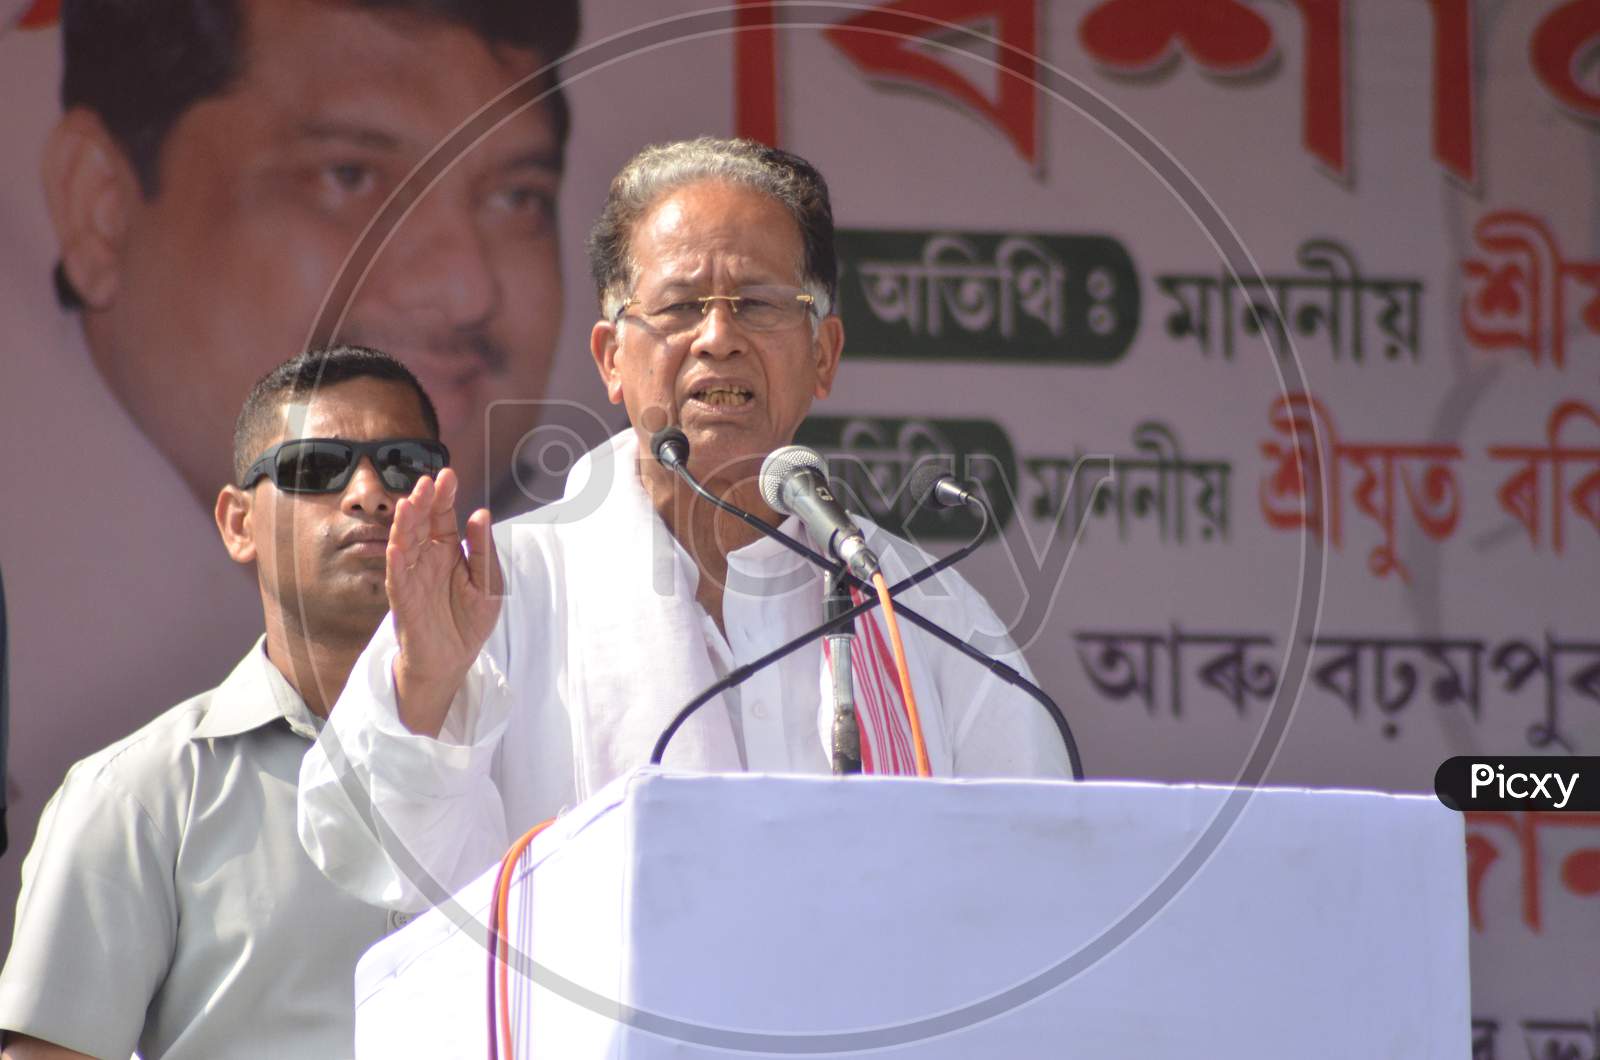 Assam Former Chief Minister  And Congress Leader Tarun Gogoi Addressing People   In Election Rally Meeting  in  Assam